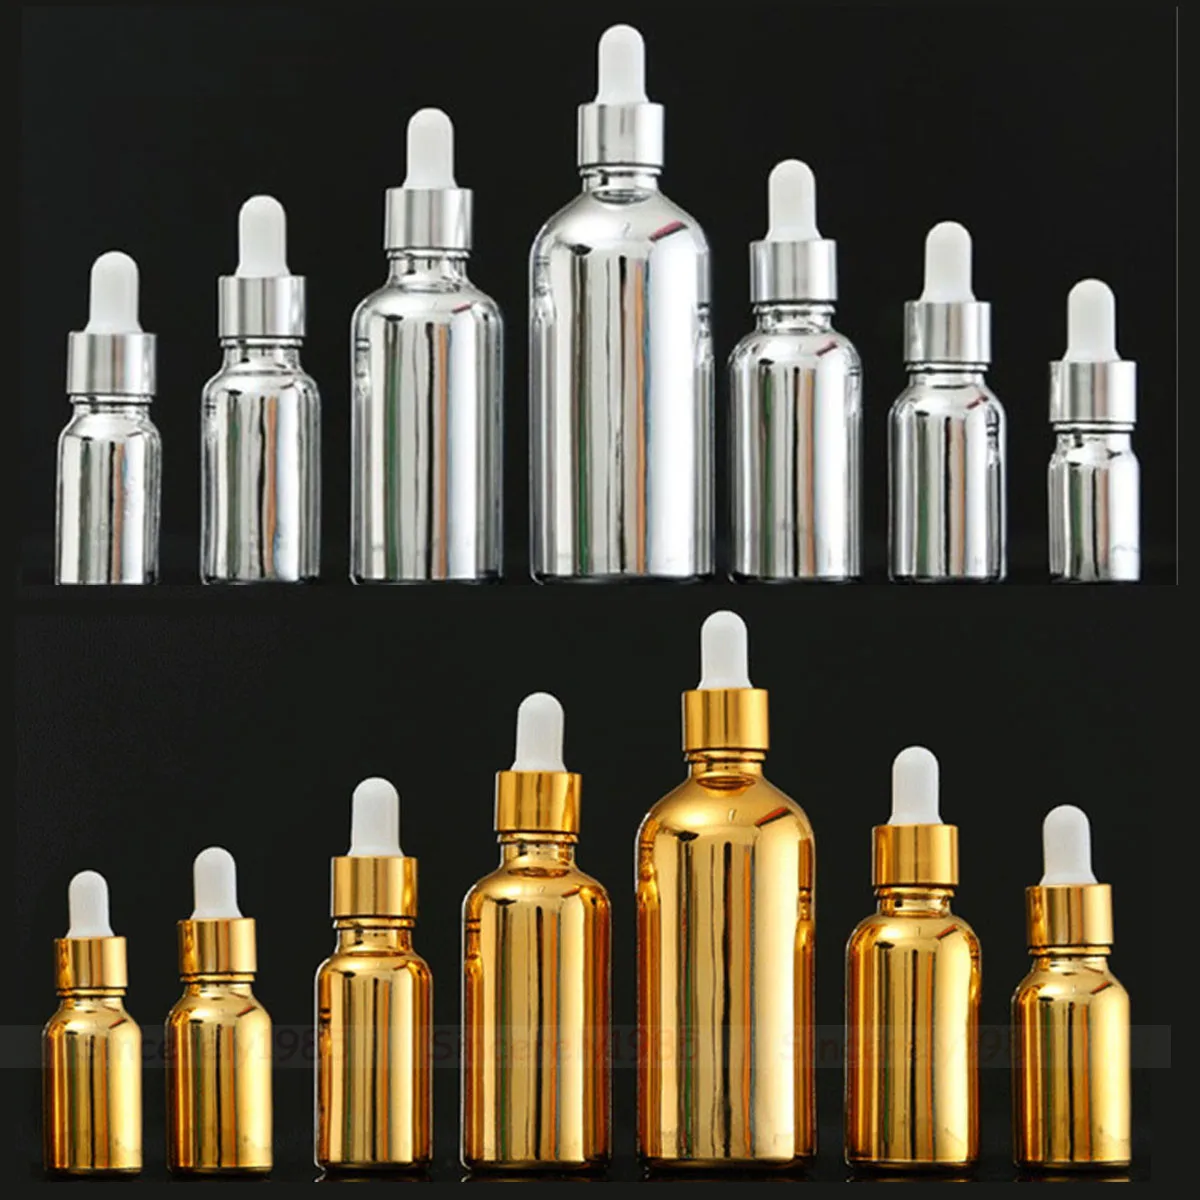 

10X Gold / Silver Glass Dropper Bottles Essential Oils 5ml to 100ML Bright Shiny Glass Dripper Portable Refillable Travel Bottle